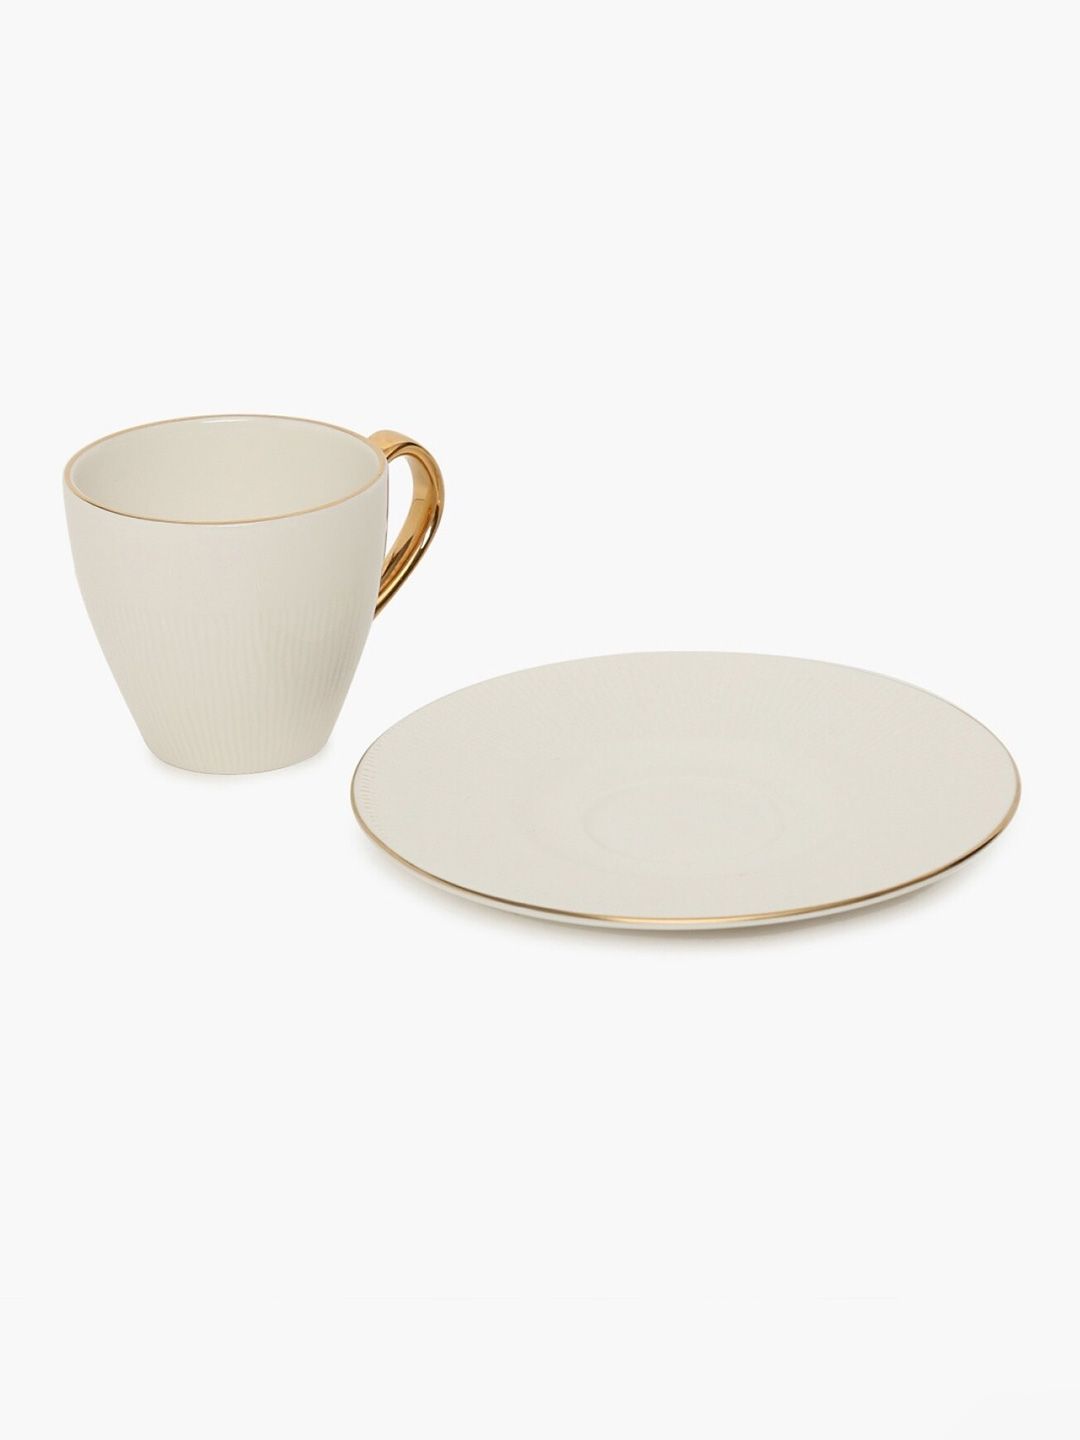 Home Centre Set Of 2 Beige & Gold-Toned Solid Ceramic Cup and Saucer Price in India